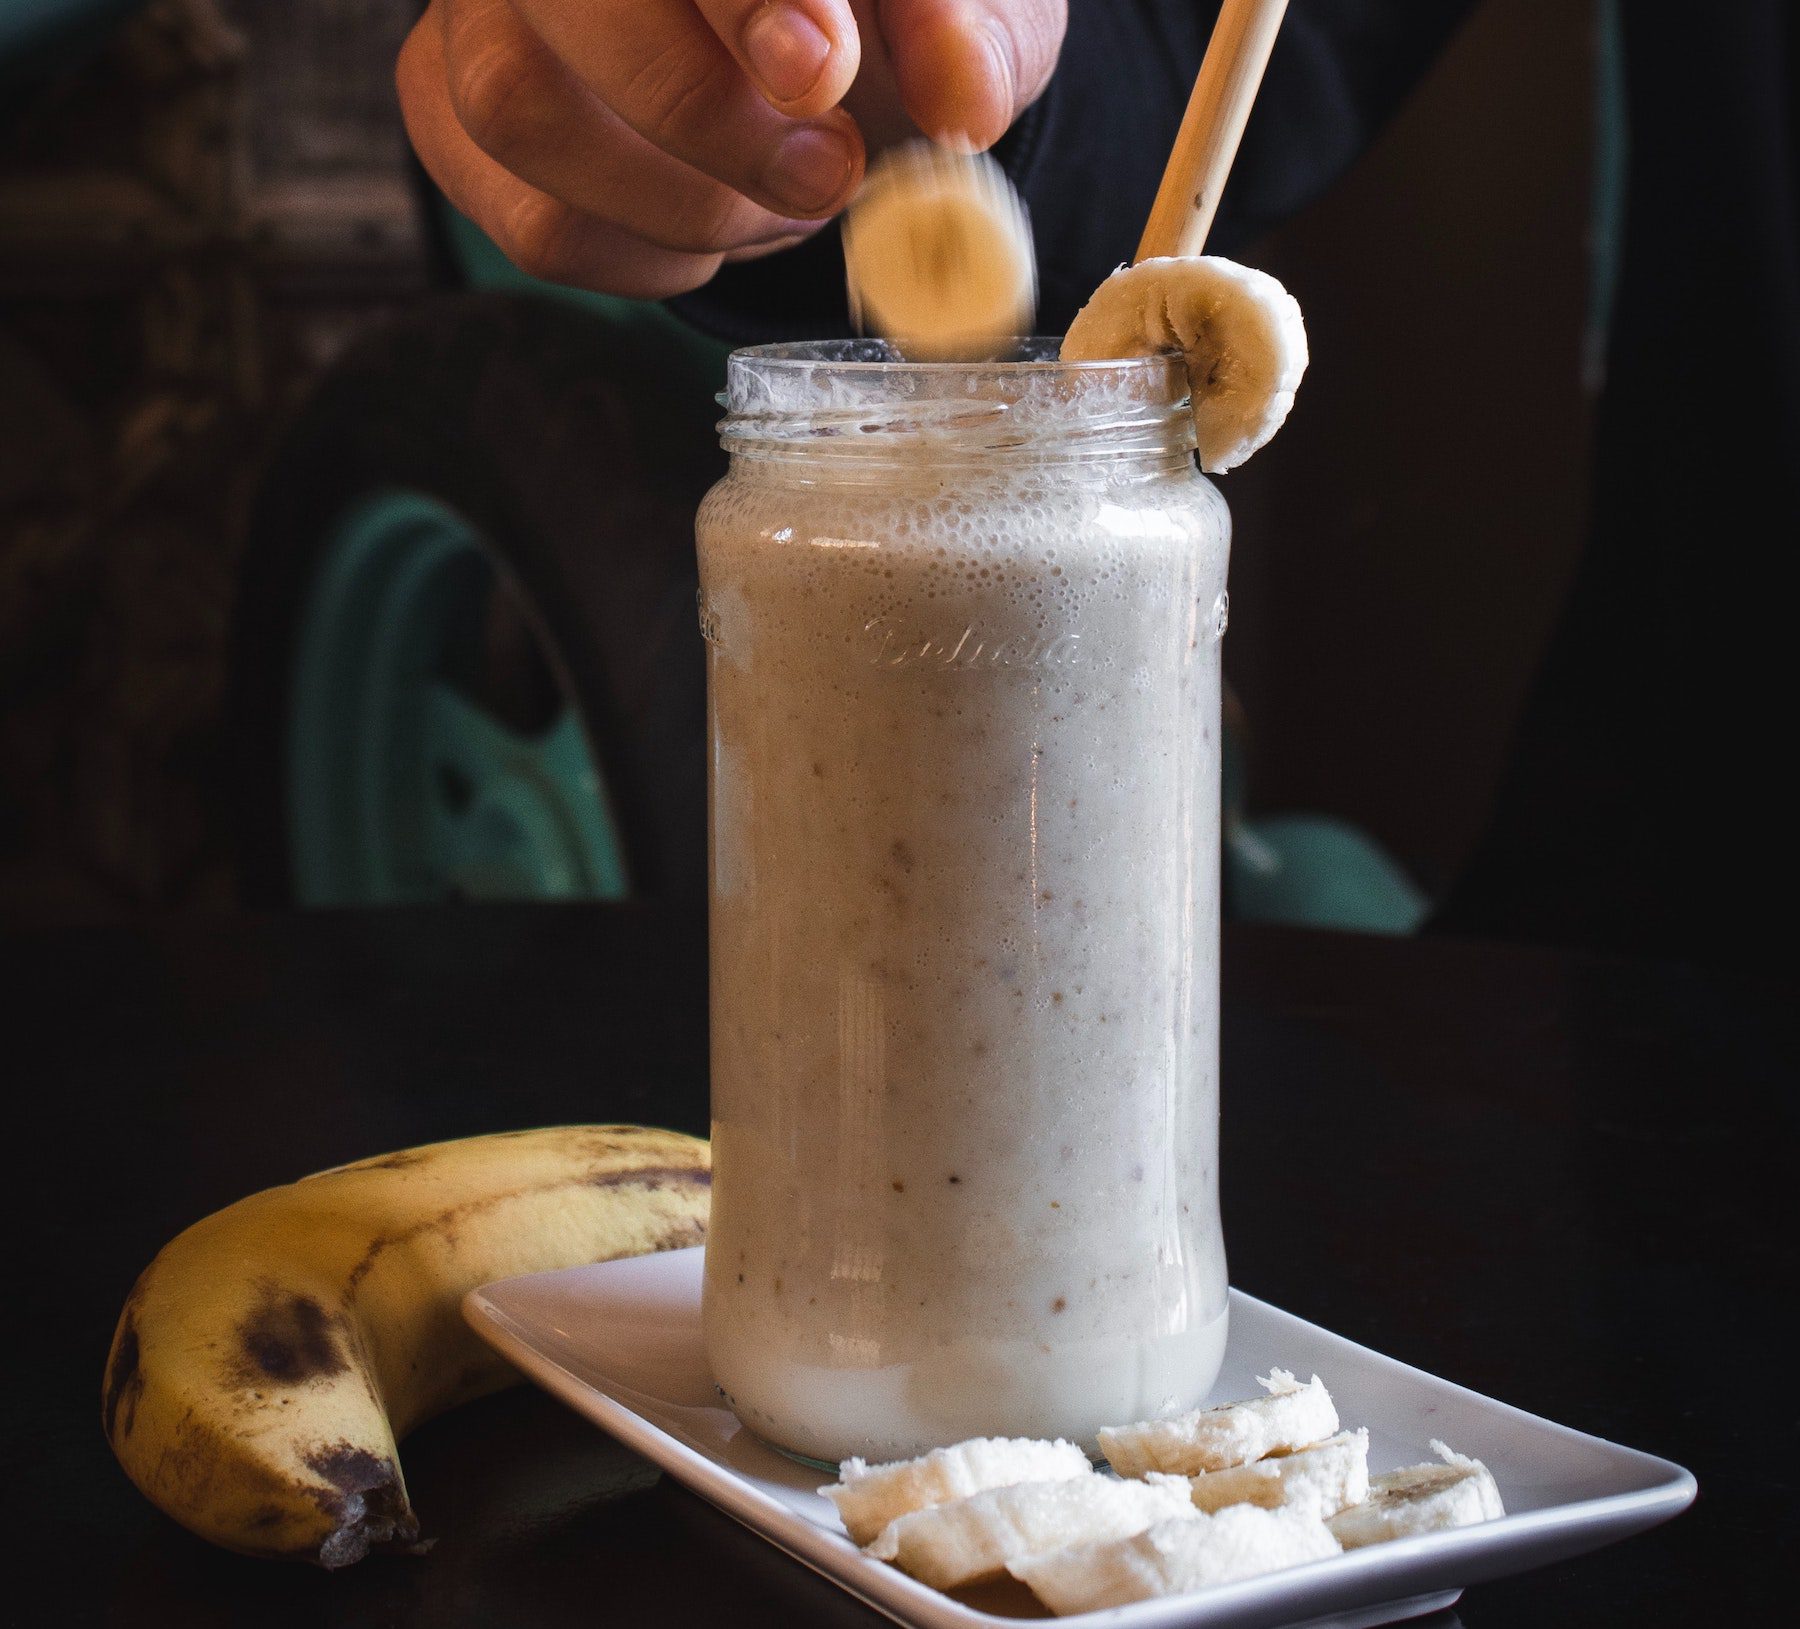 A tan-colored smoothie in a clear jar being topped with banana slices, on a ceramic tray with more bananas.